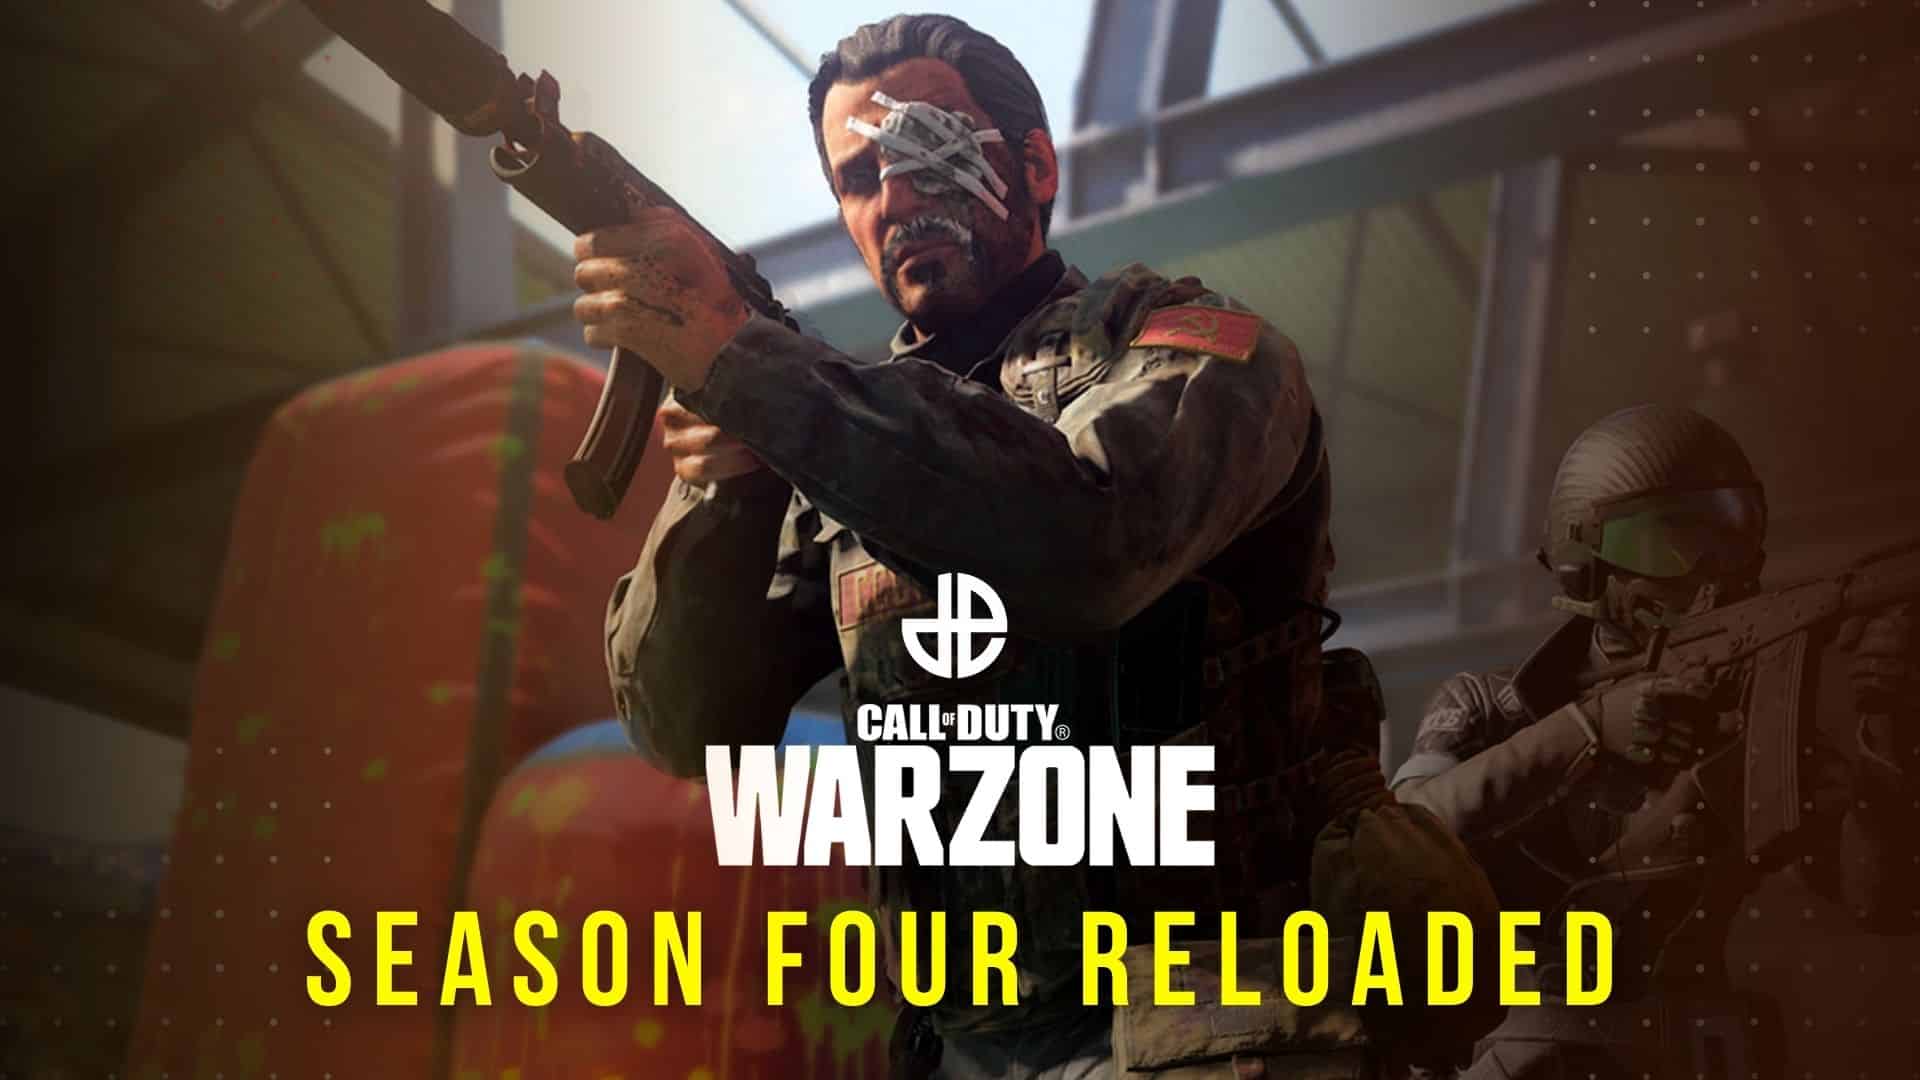 Warzone Season 4 Reloaded is just around the corner.